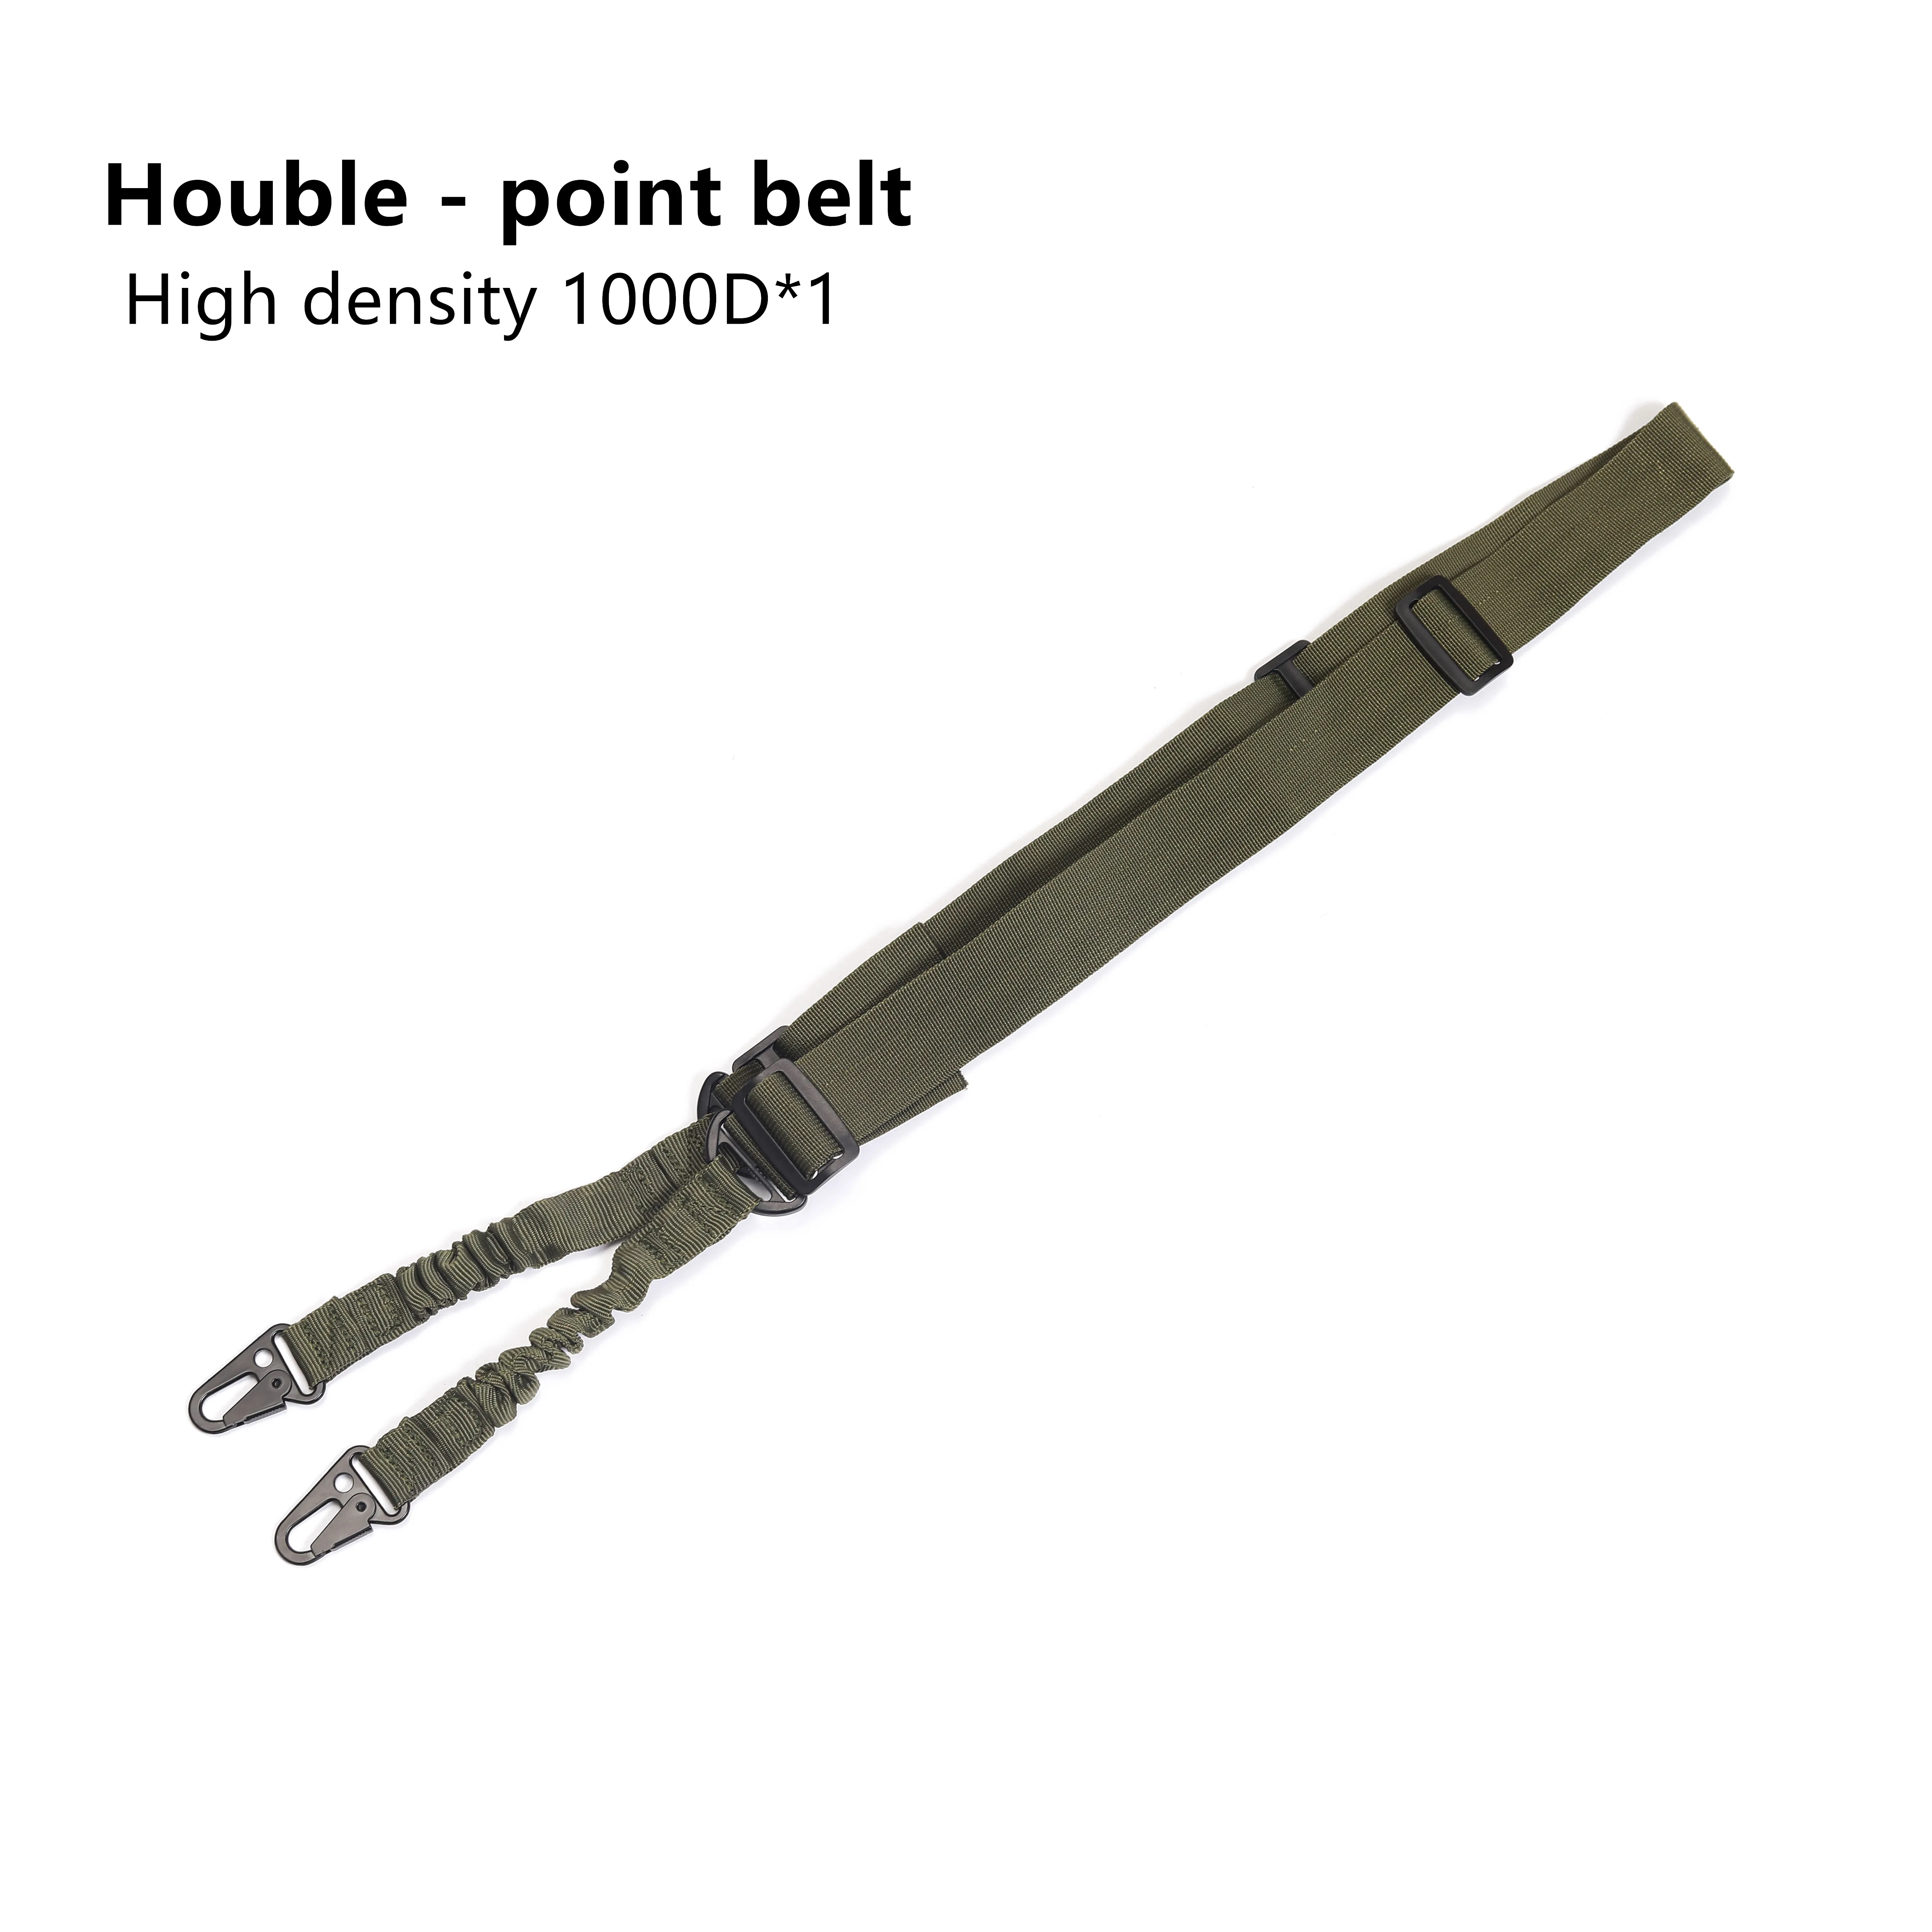 

2020 New Durable 1000D Single Point 1-Point One Point Heavy Duty Mount Bungee Military Rifle Sling Adjustable Tactical Gun Sling